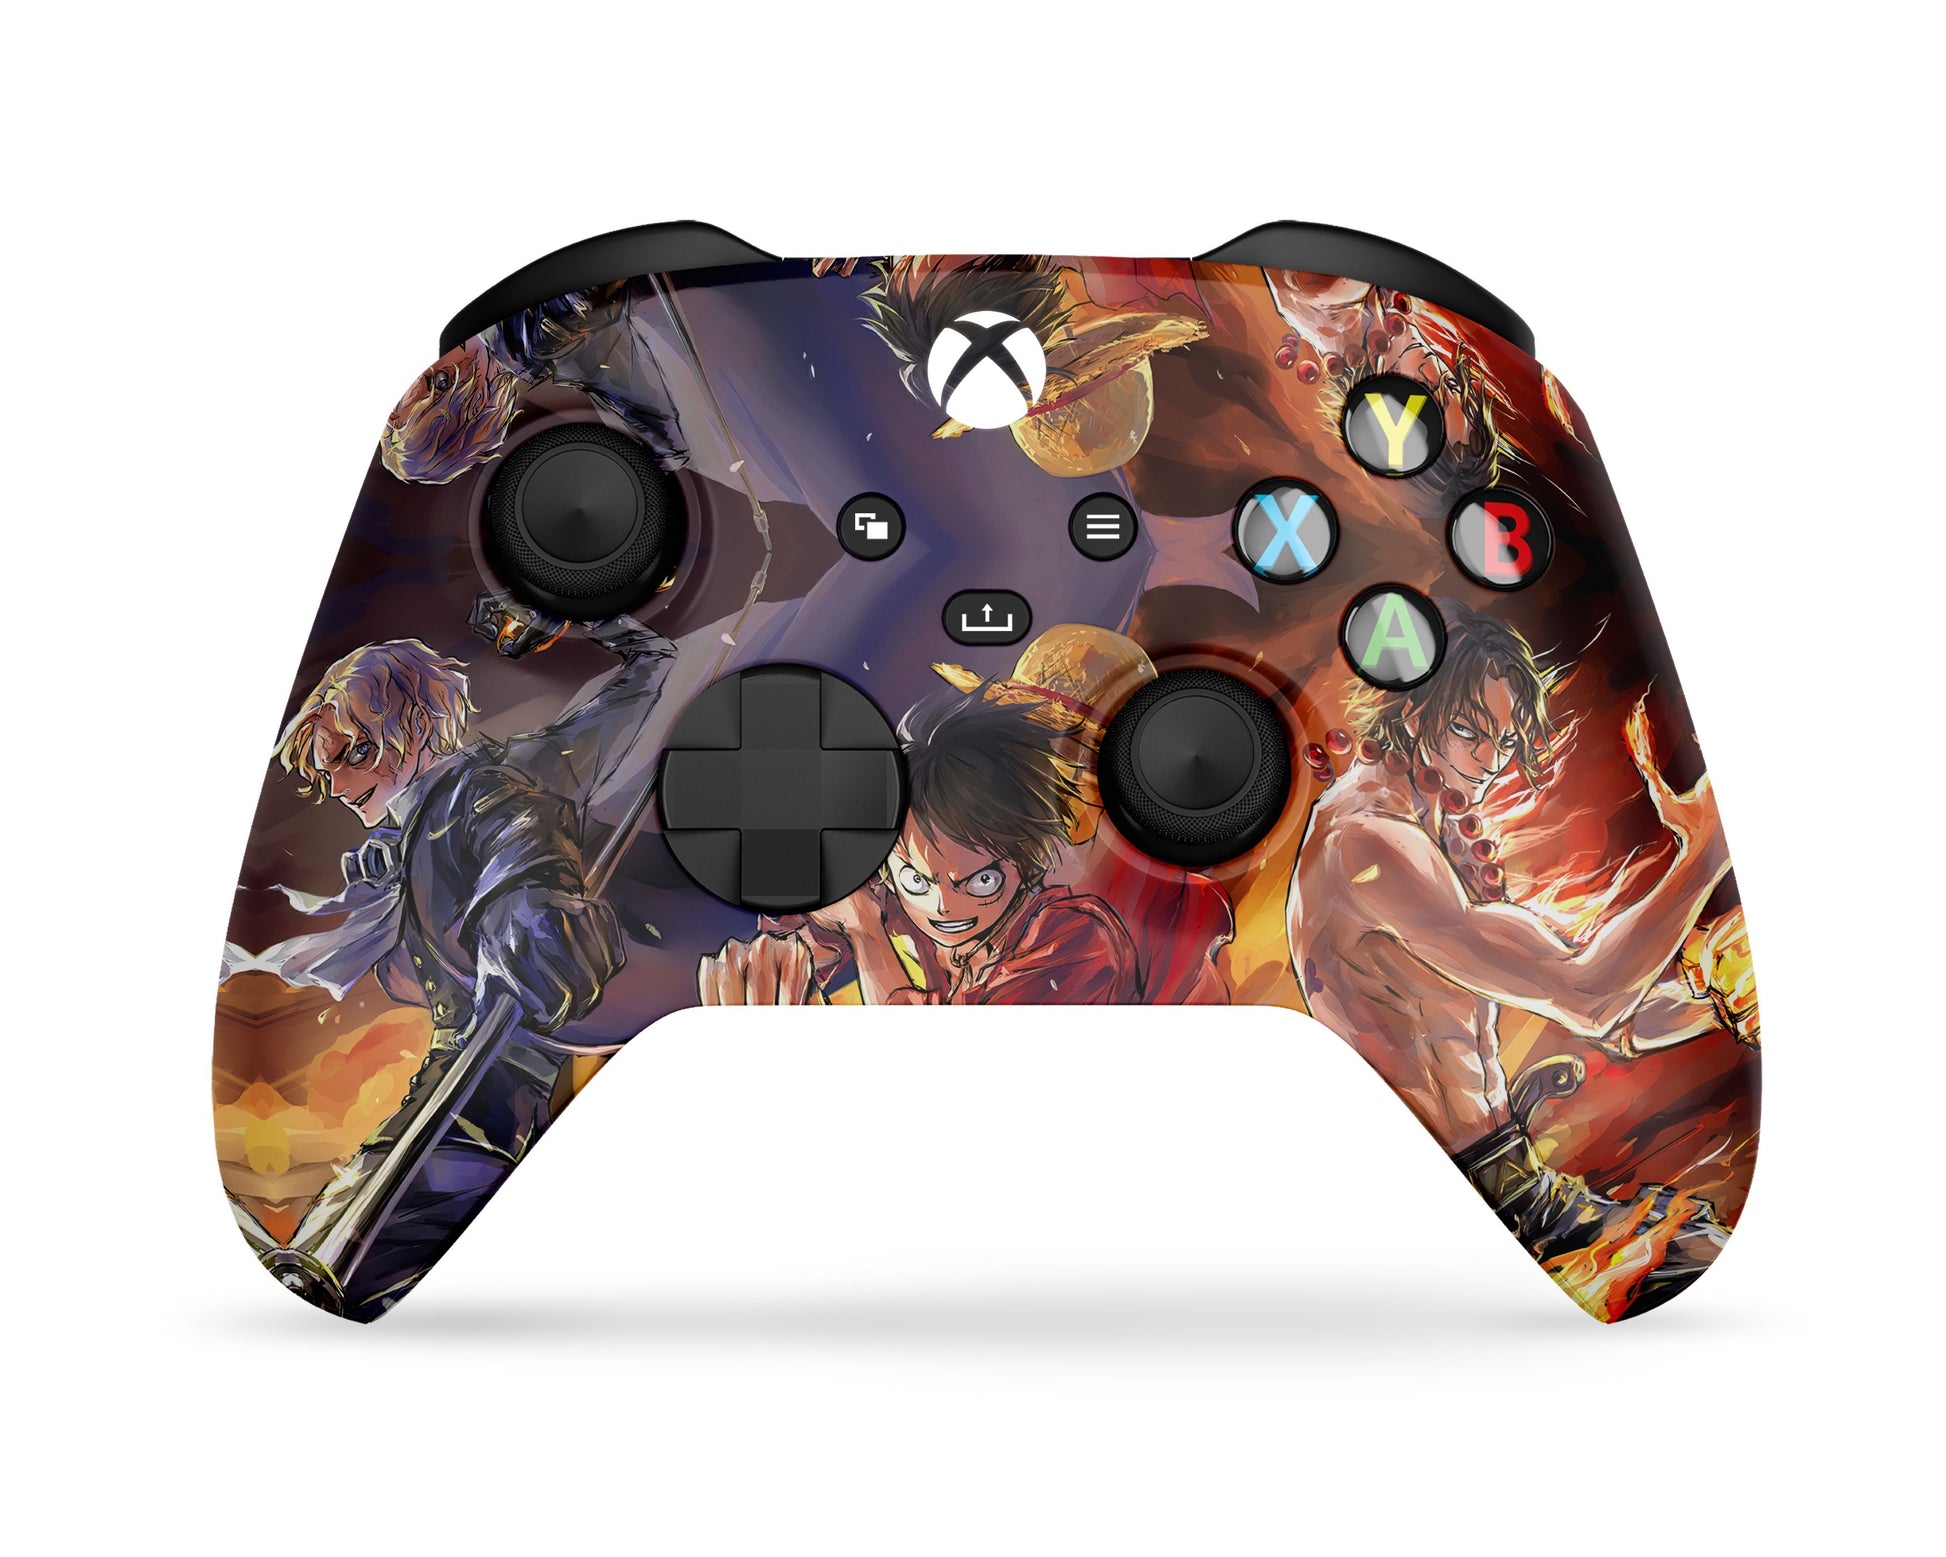 Support manette Xbox série X